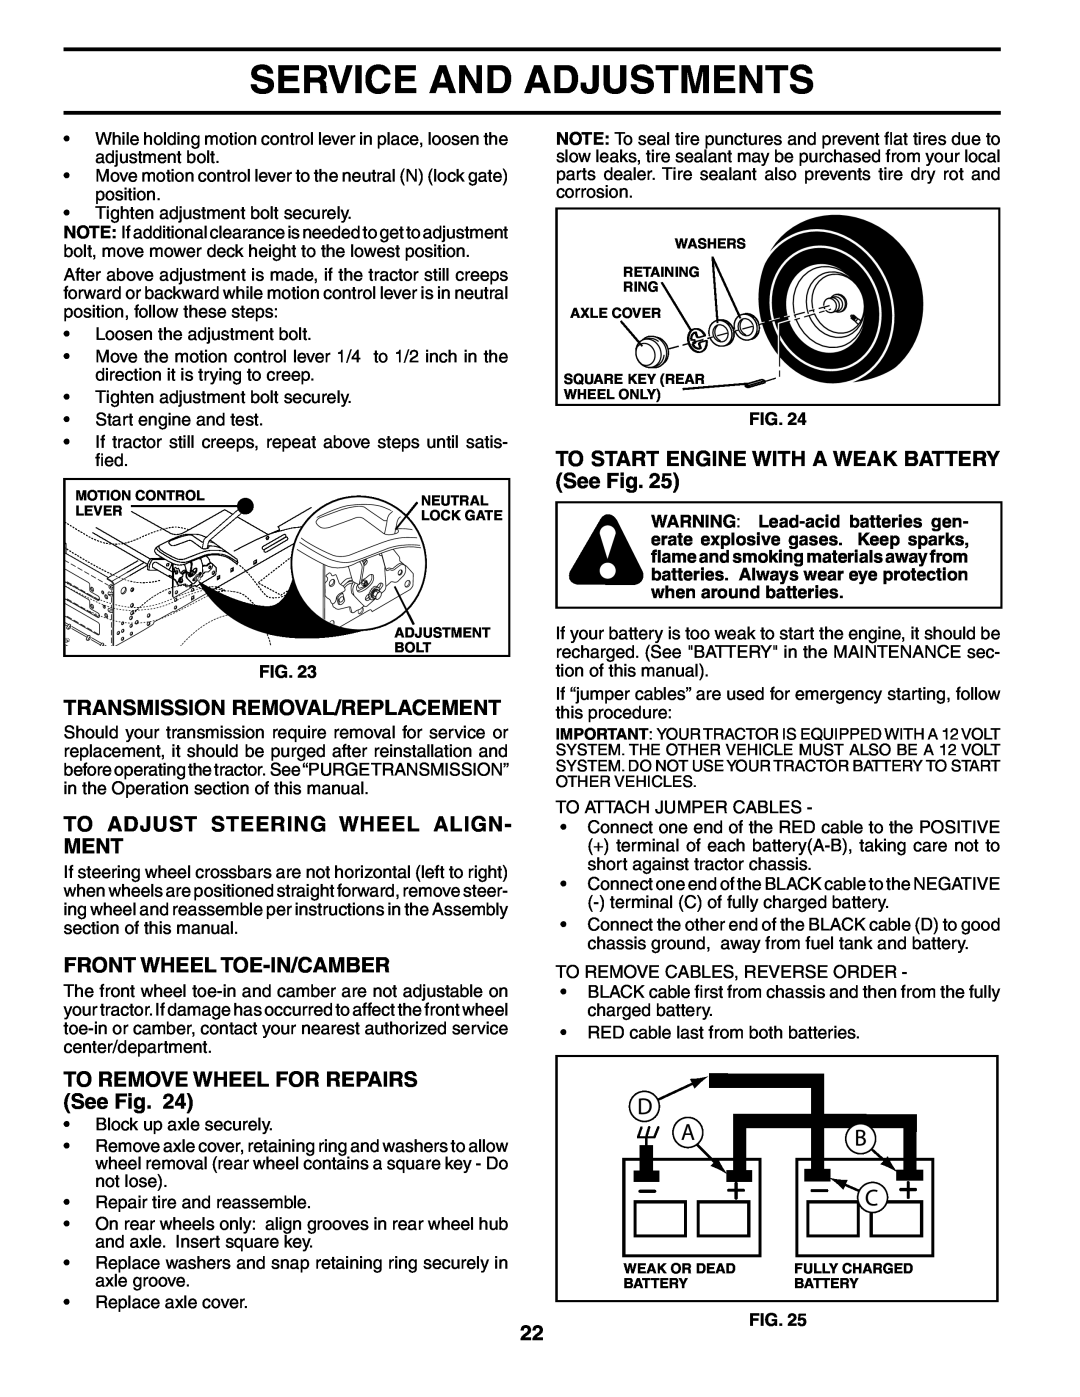 Poulan BB185H42YT manual Transmission Removal/Replacement, To Adjust Steering Wheel Align- Ment, Front Wheel Toe-In/Camber 